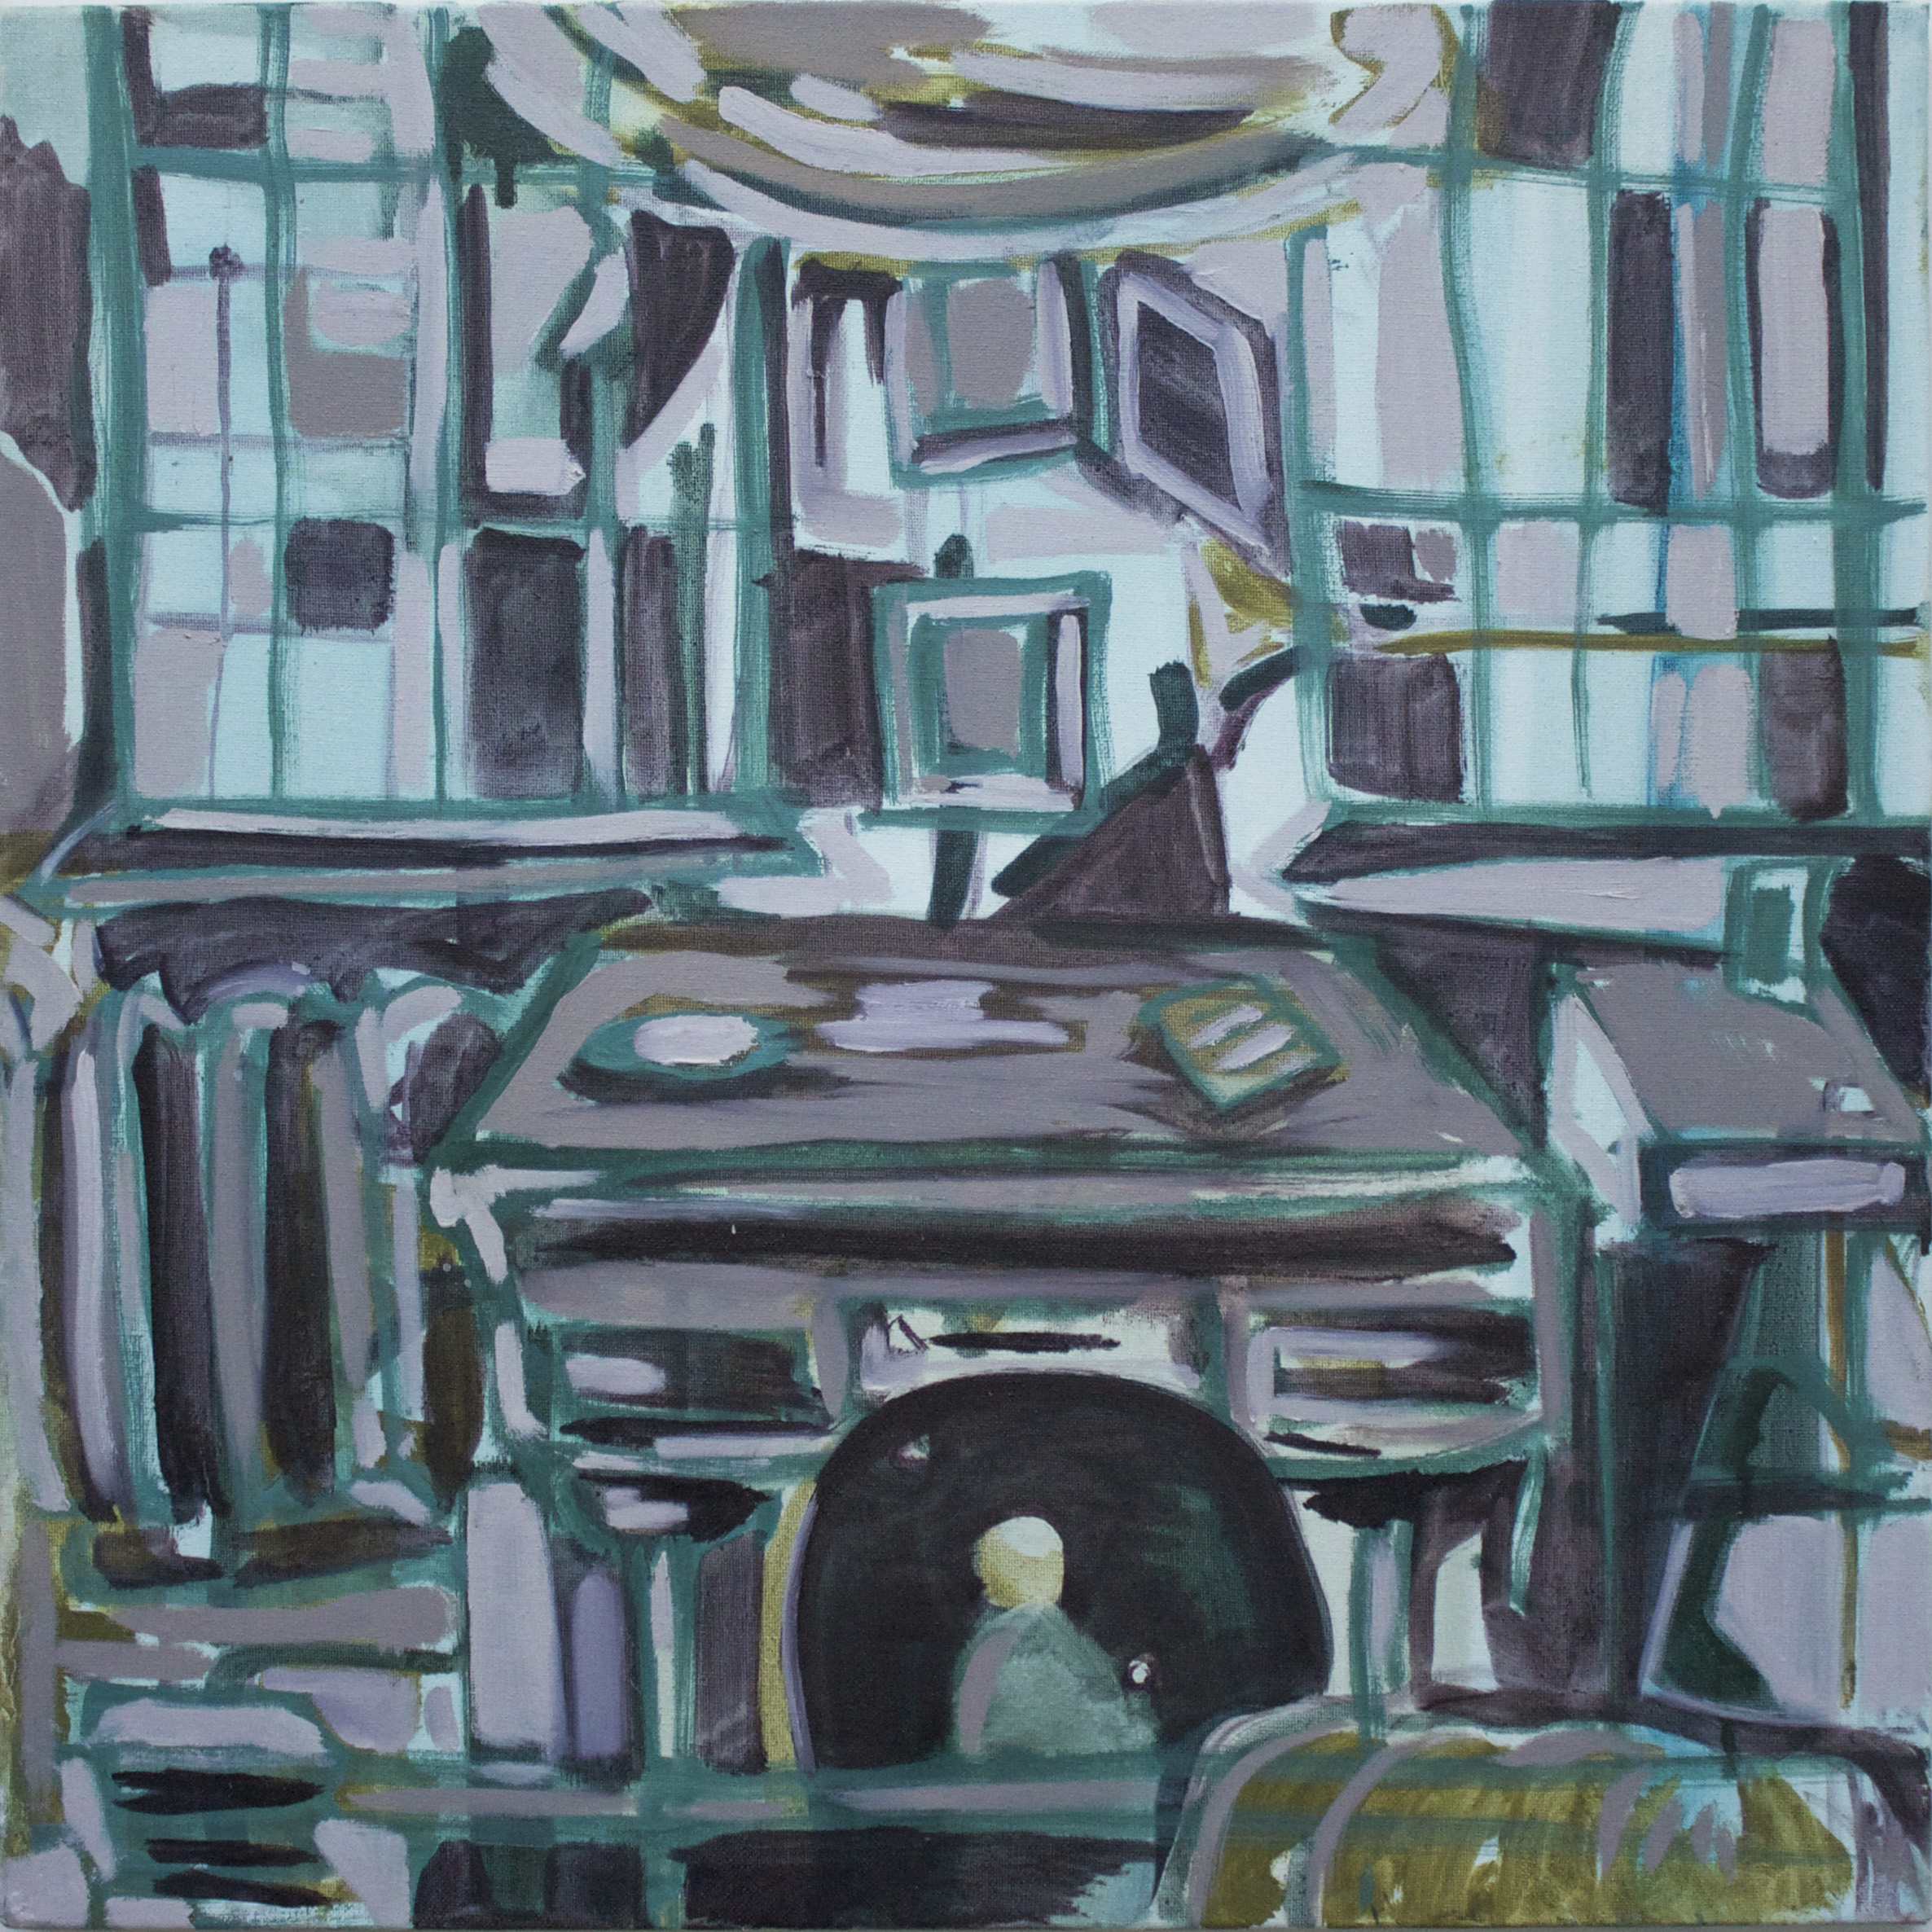   Living Space  (2014) oil on canvas 24" x 24"    